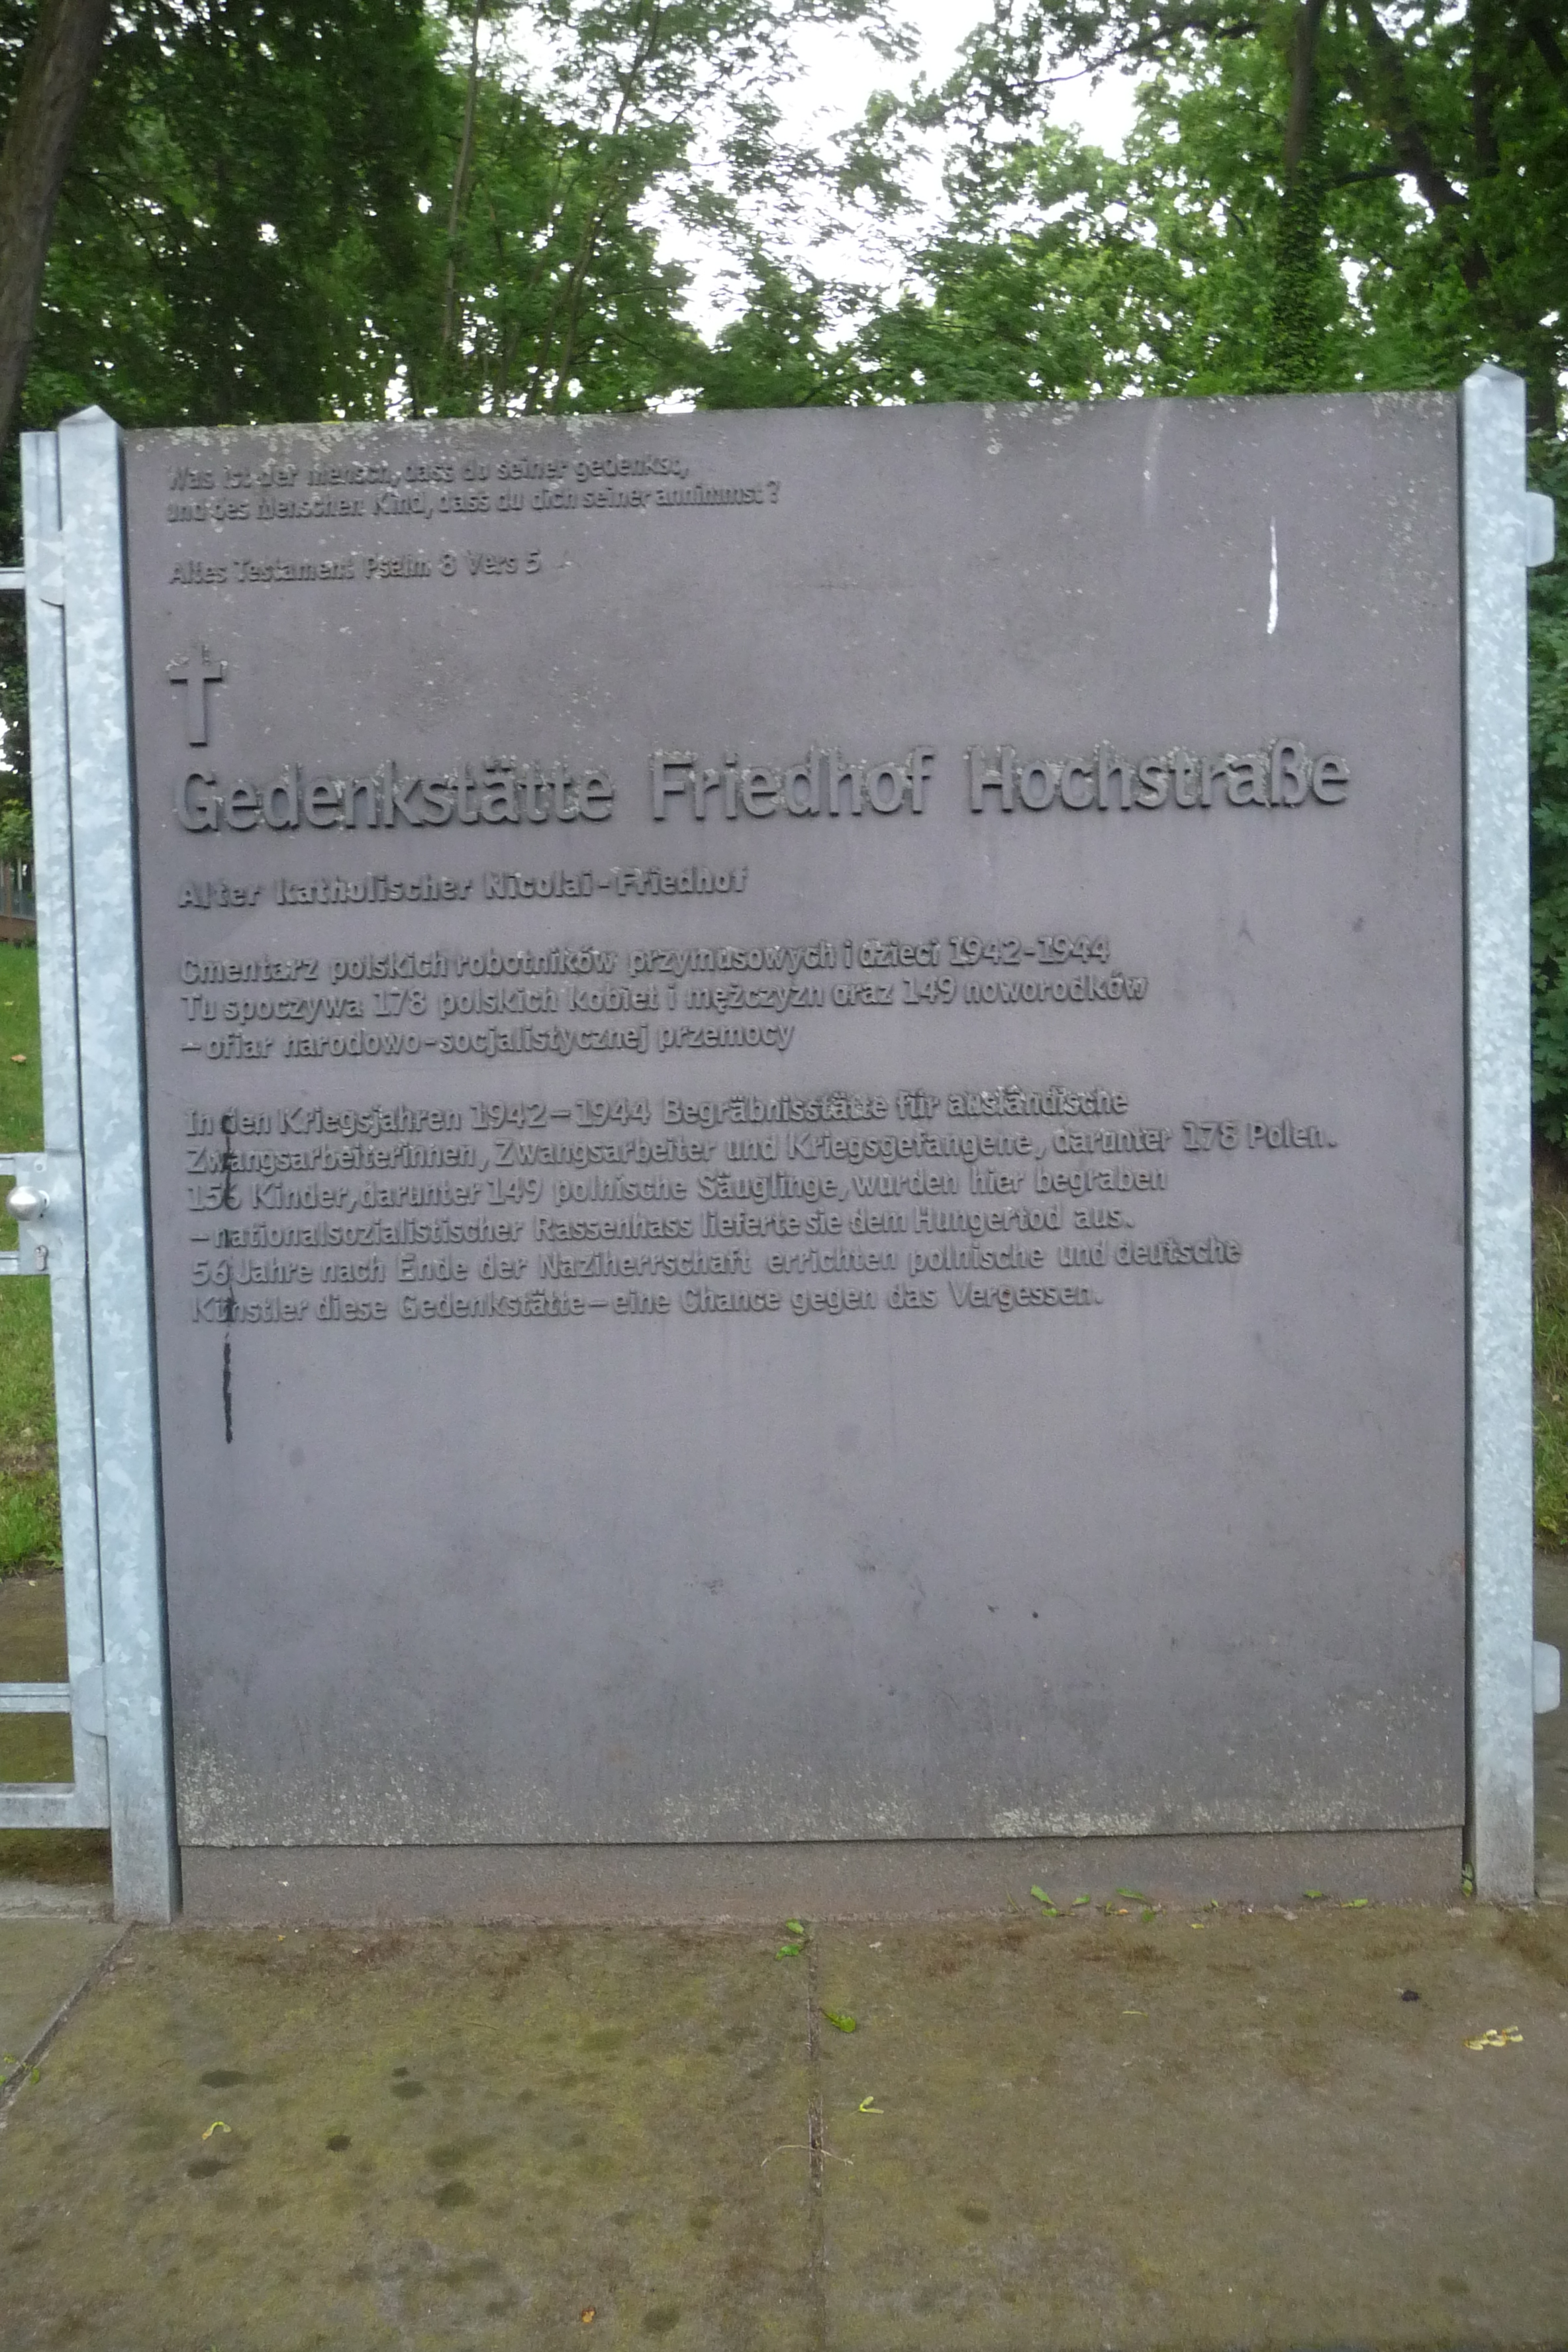 Information board at the entry